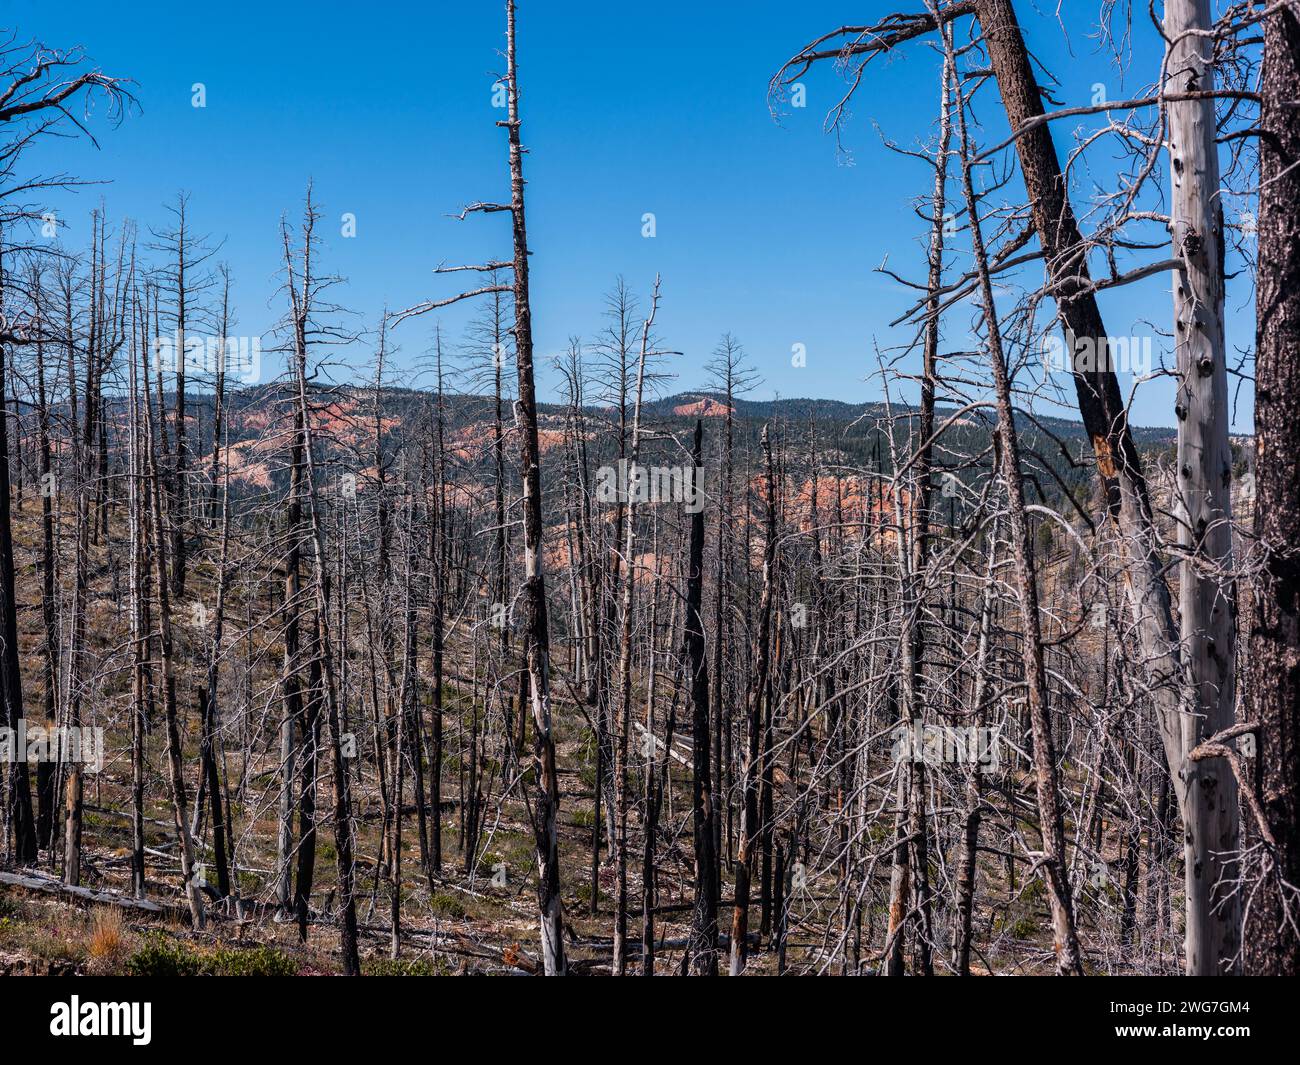 USA, State of Utah. Garfield County. Forest after a fire near the Brice Canyon. Stock Photo